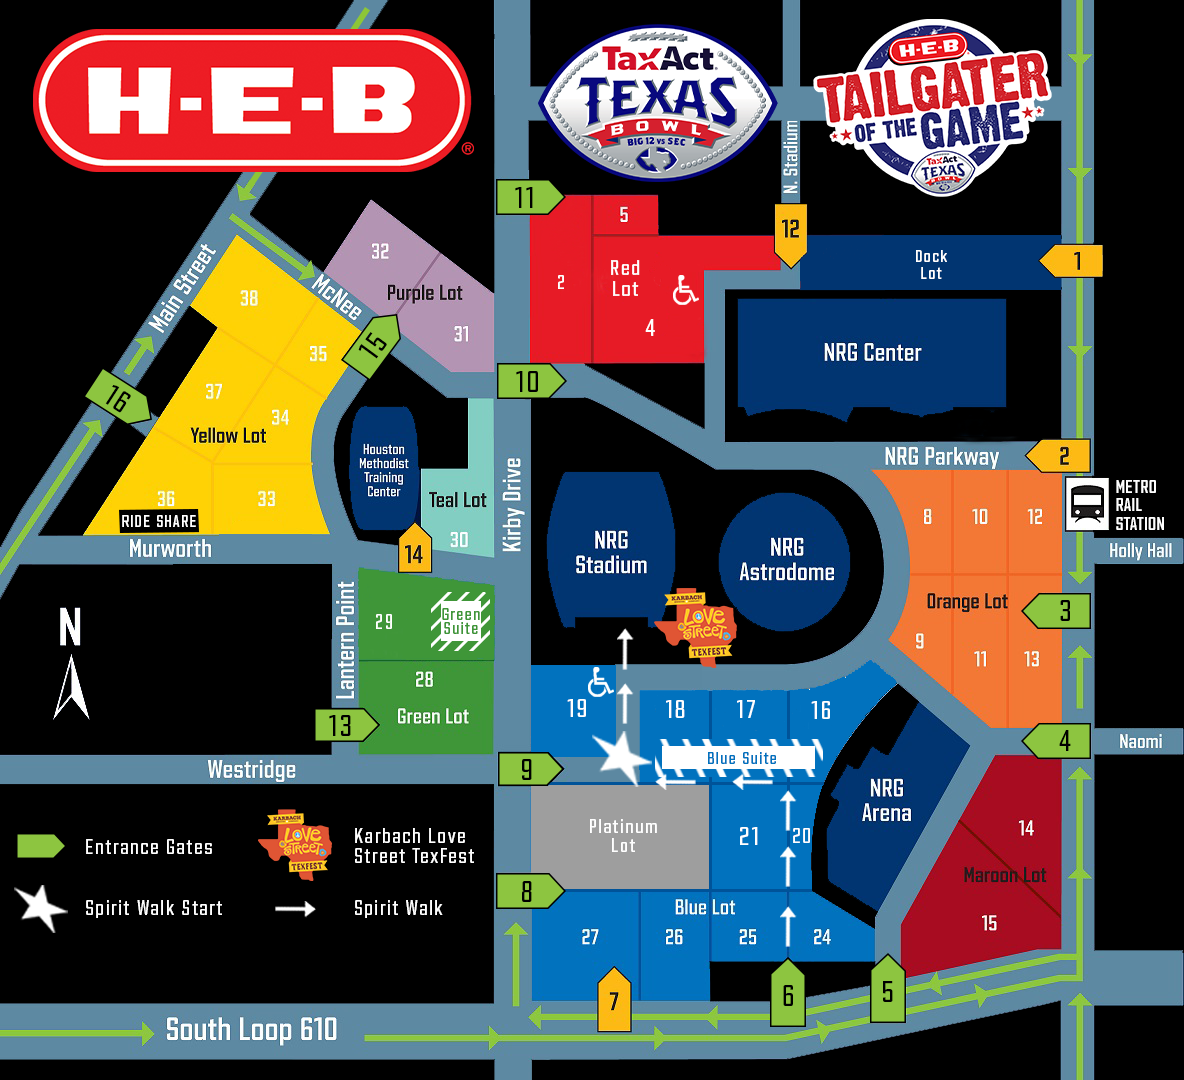 Parking Map for TaxAct Texas Bowl